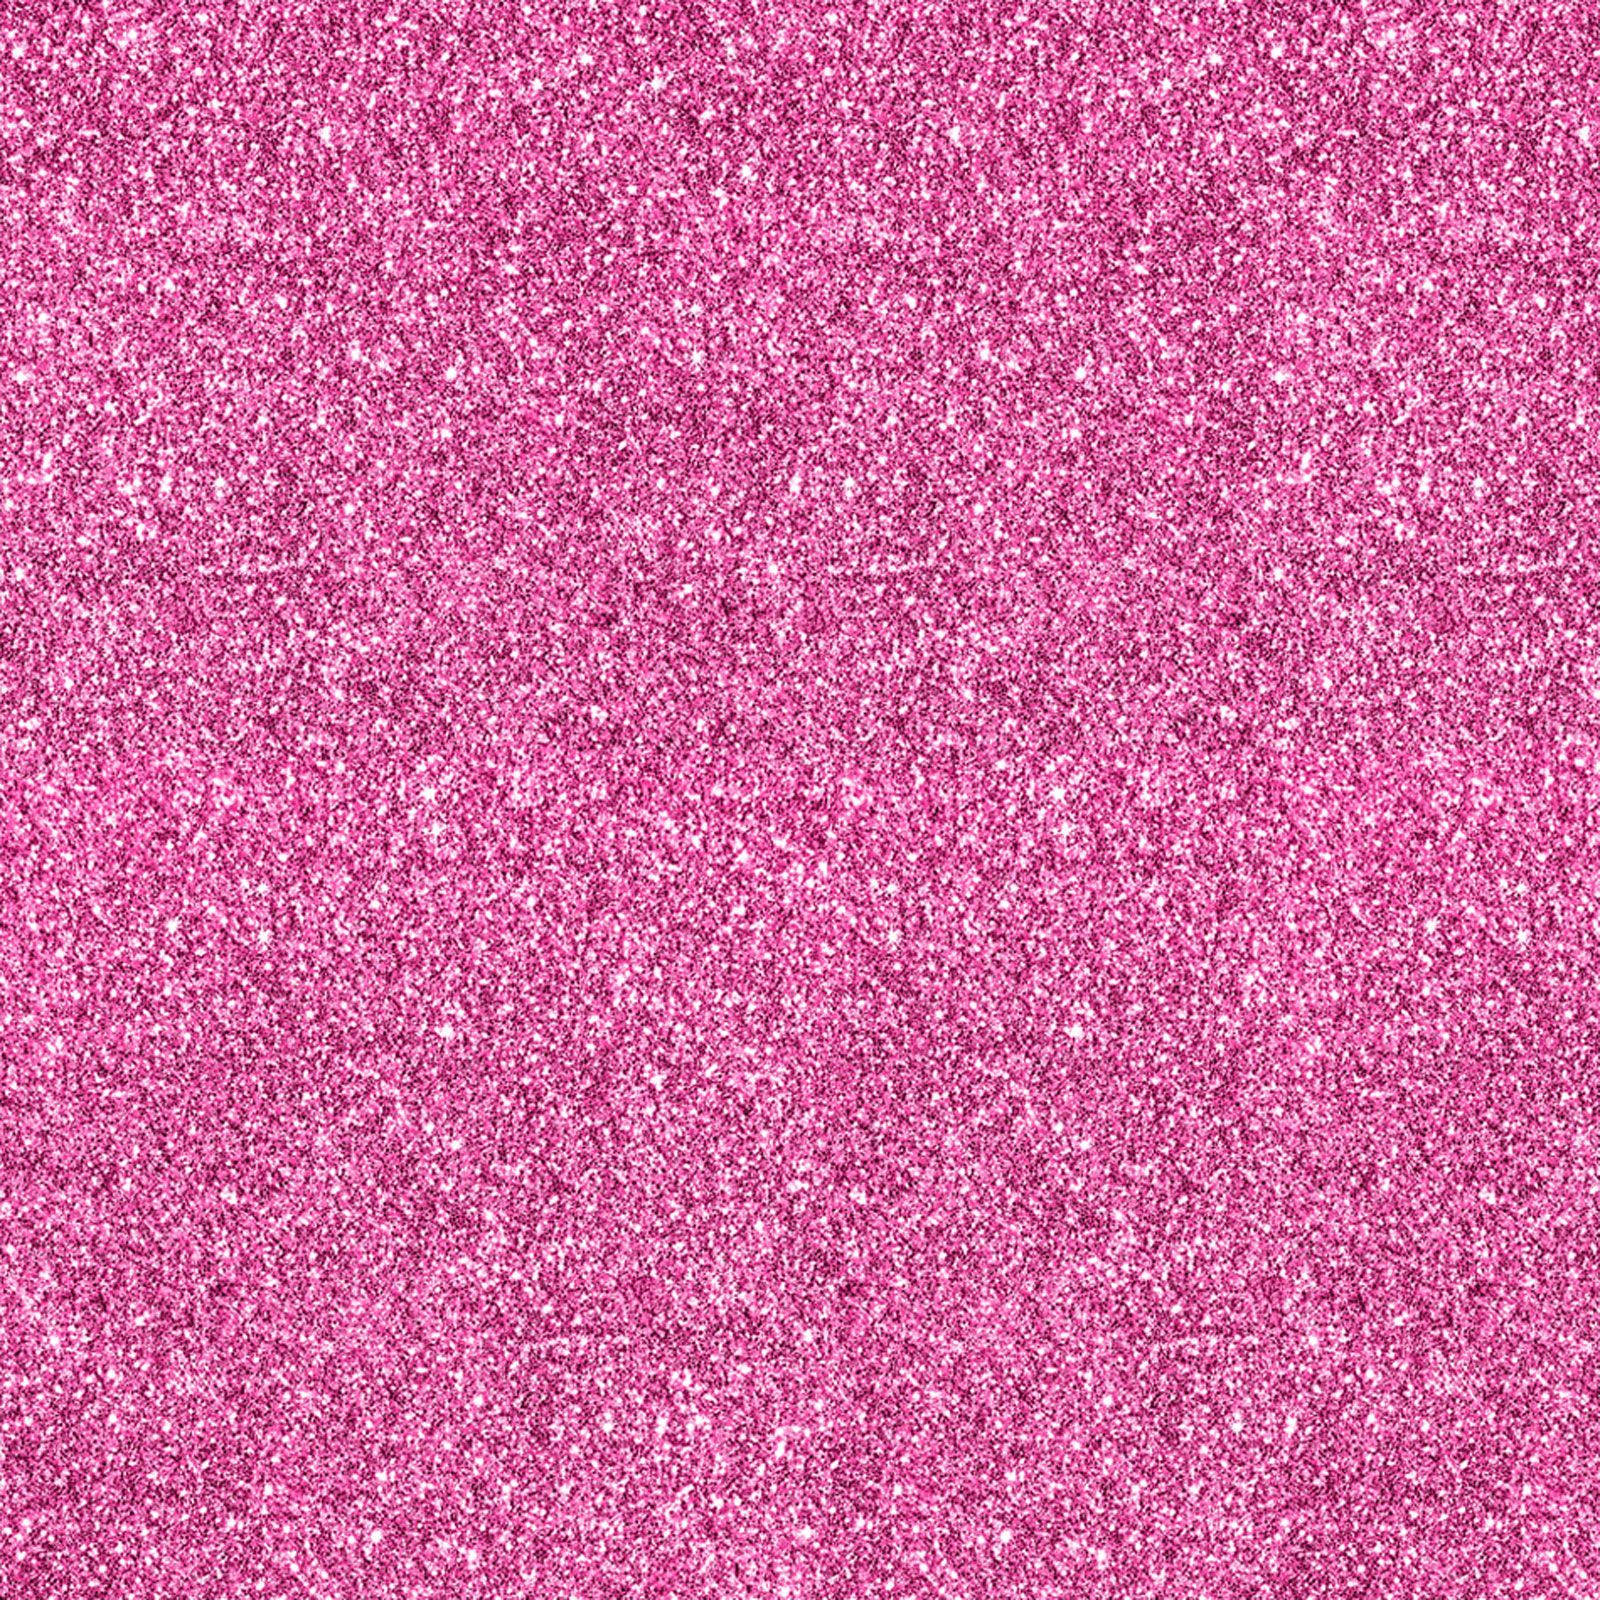 Grainy Pink Glitters Background